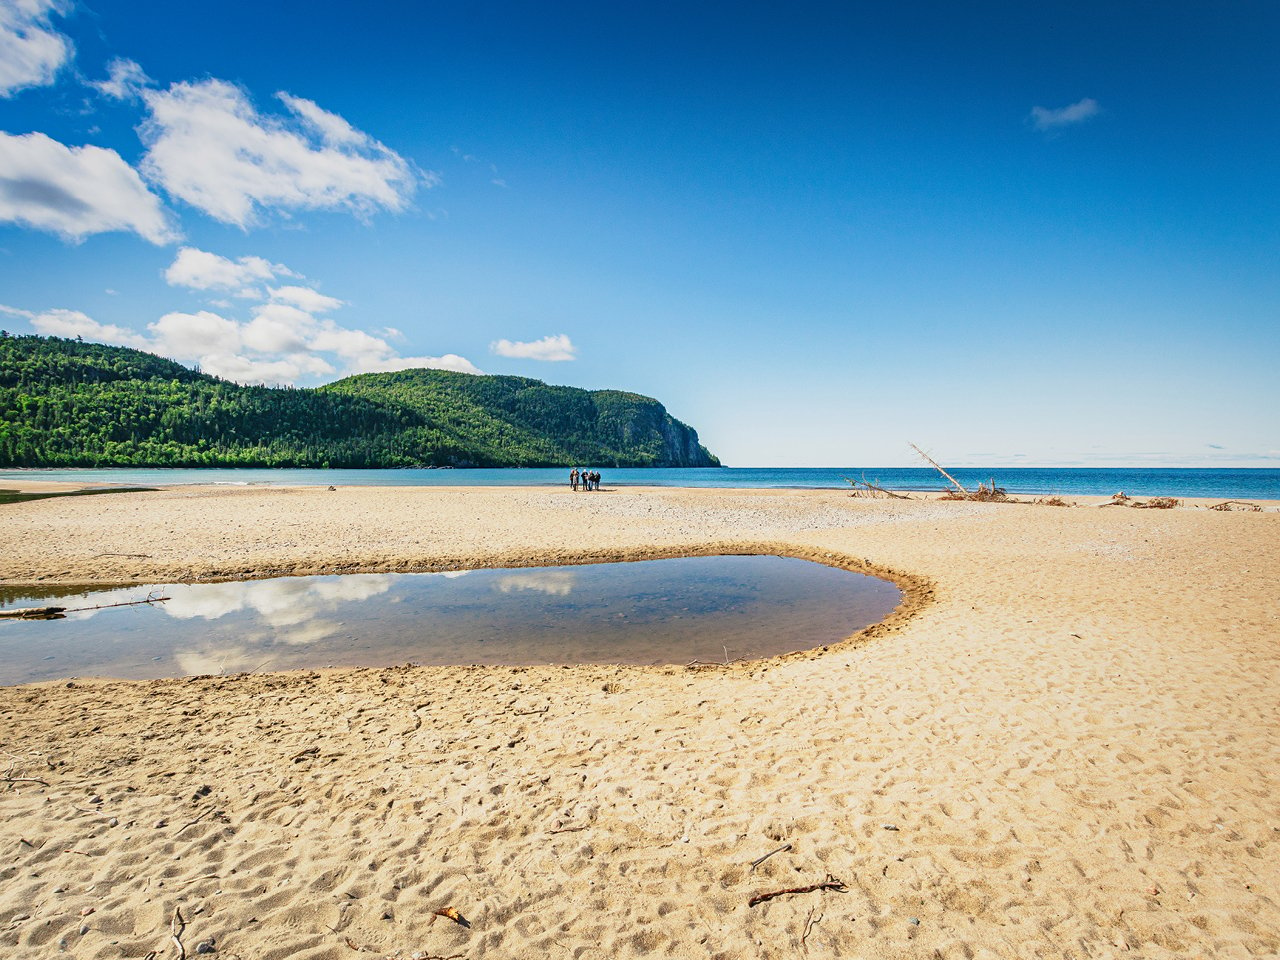 Landscape shot of a curvy beach, with water in its middle